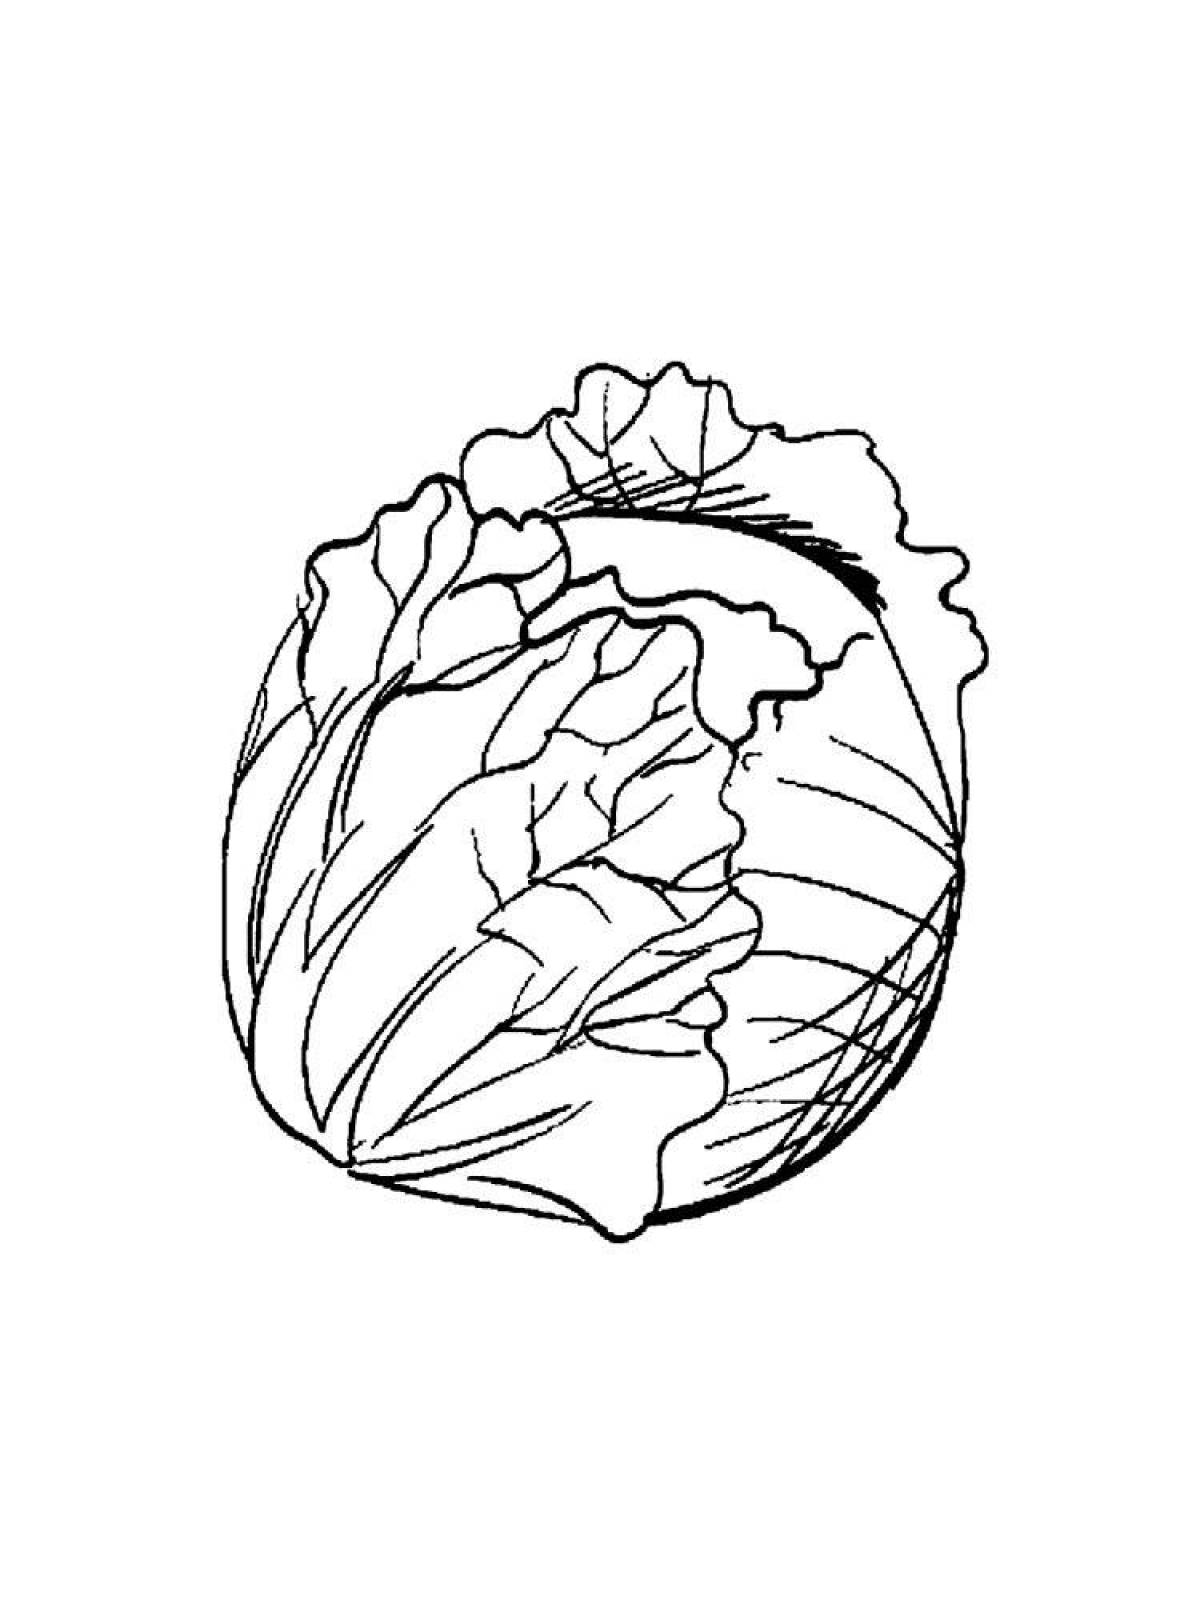 Cauliflower coloring pages for kids